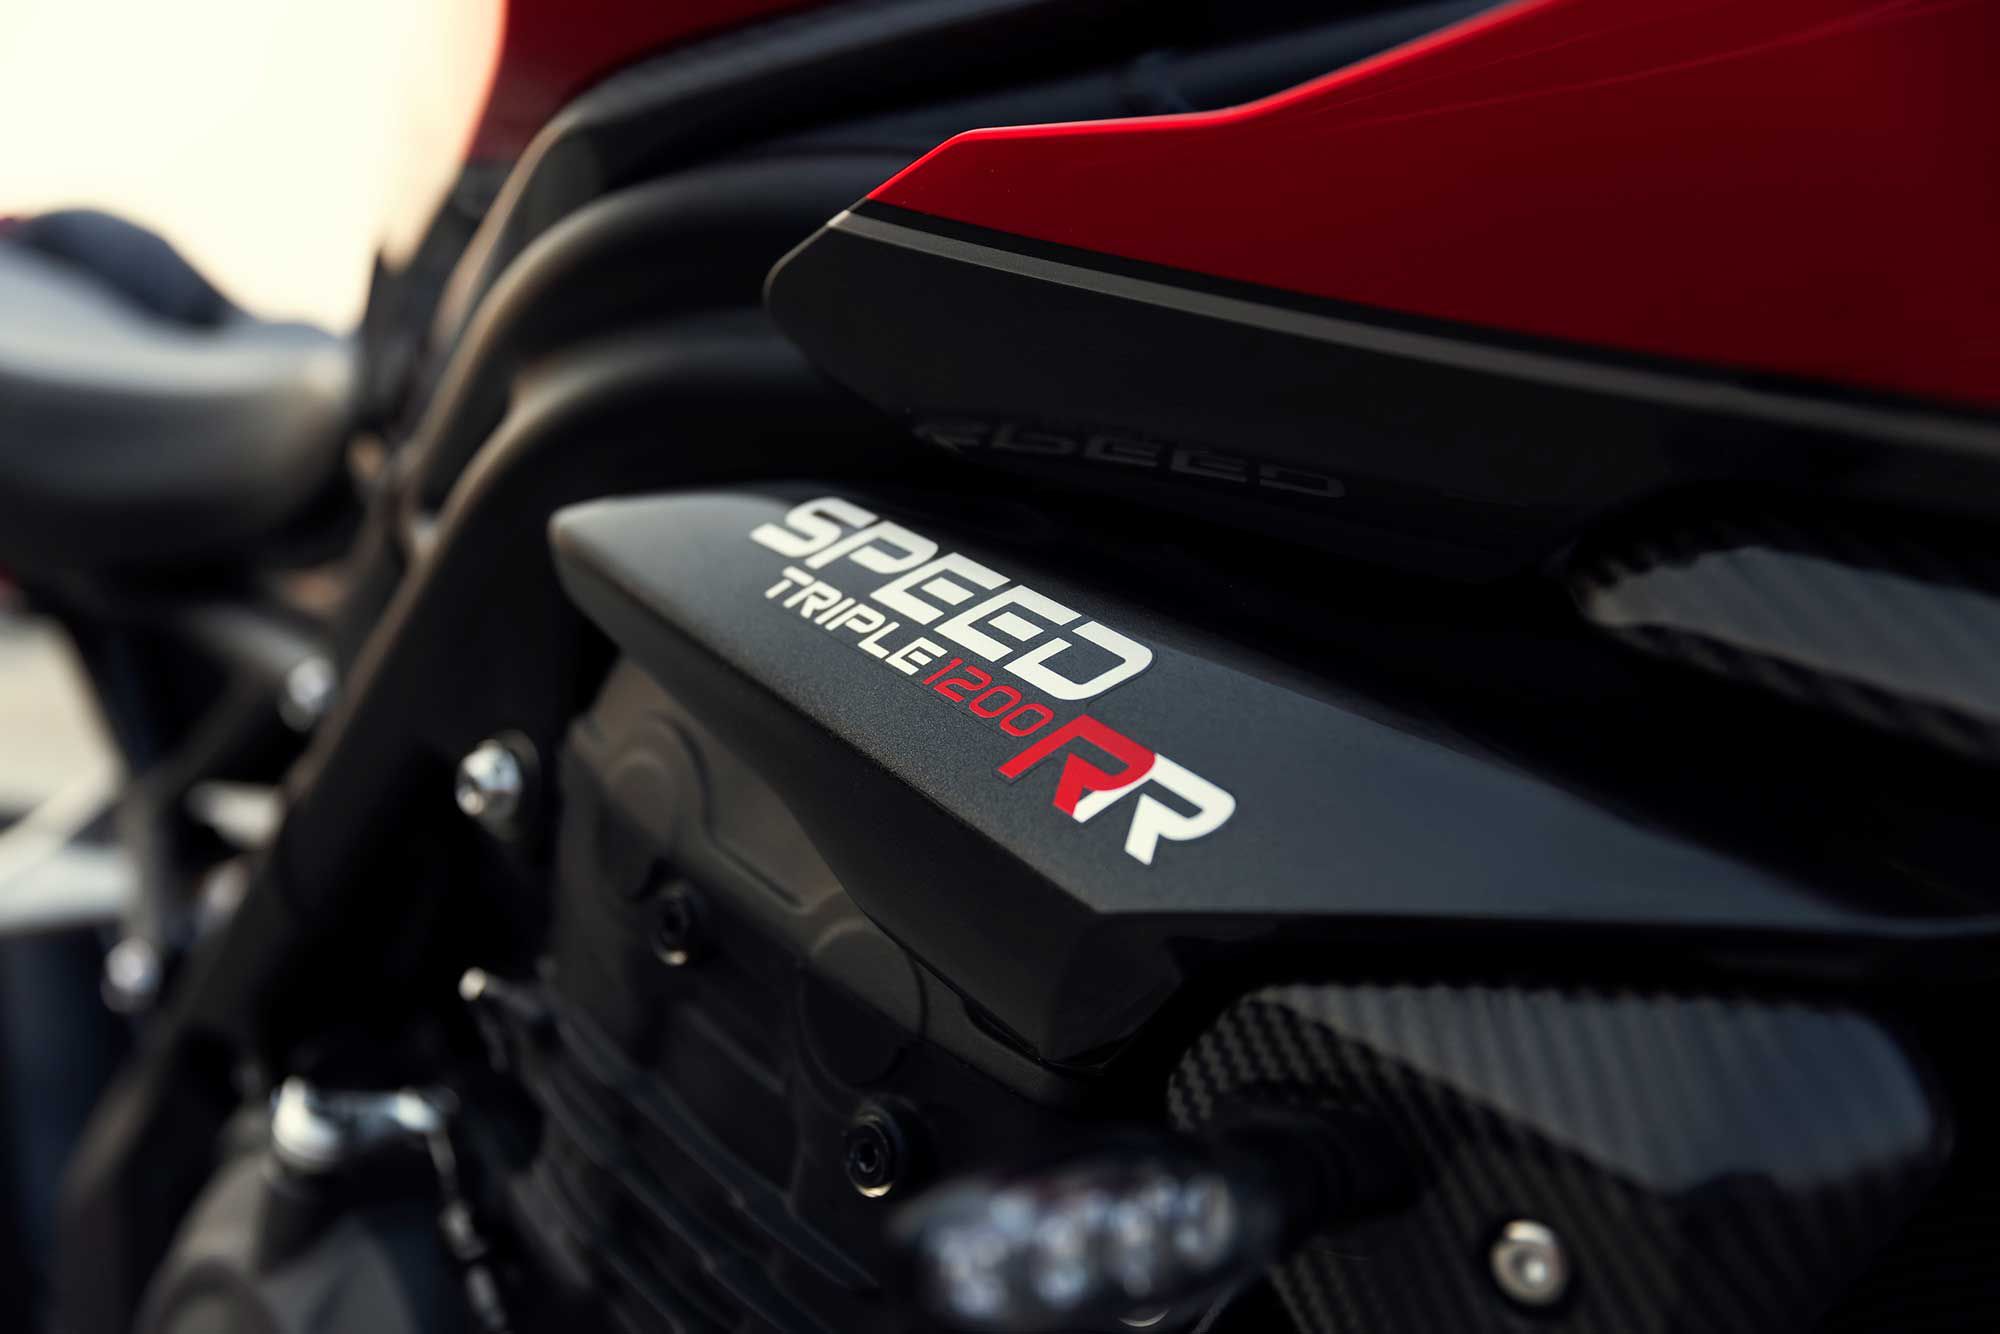 The new RR packs the same 1,160cc triple Triumph uses in the Speed Triple RS.